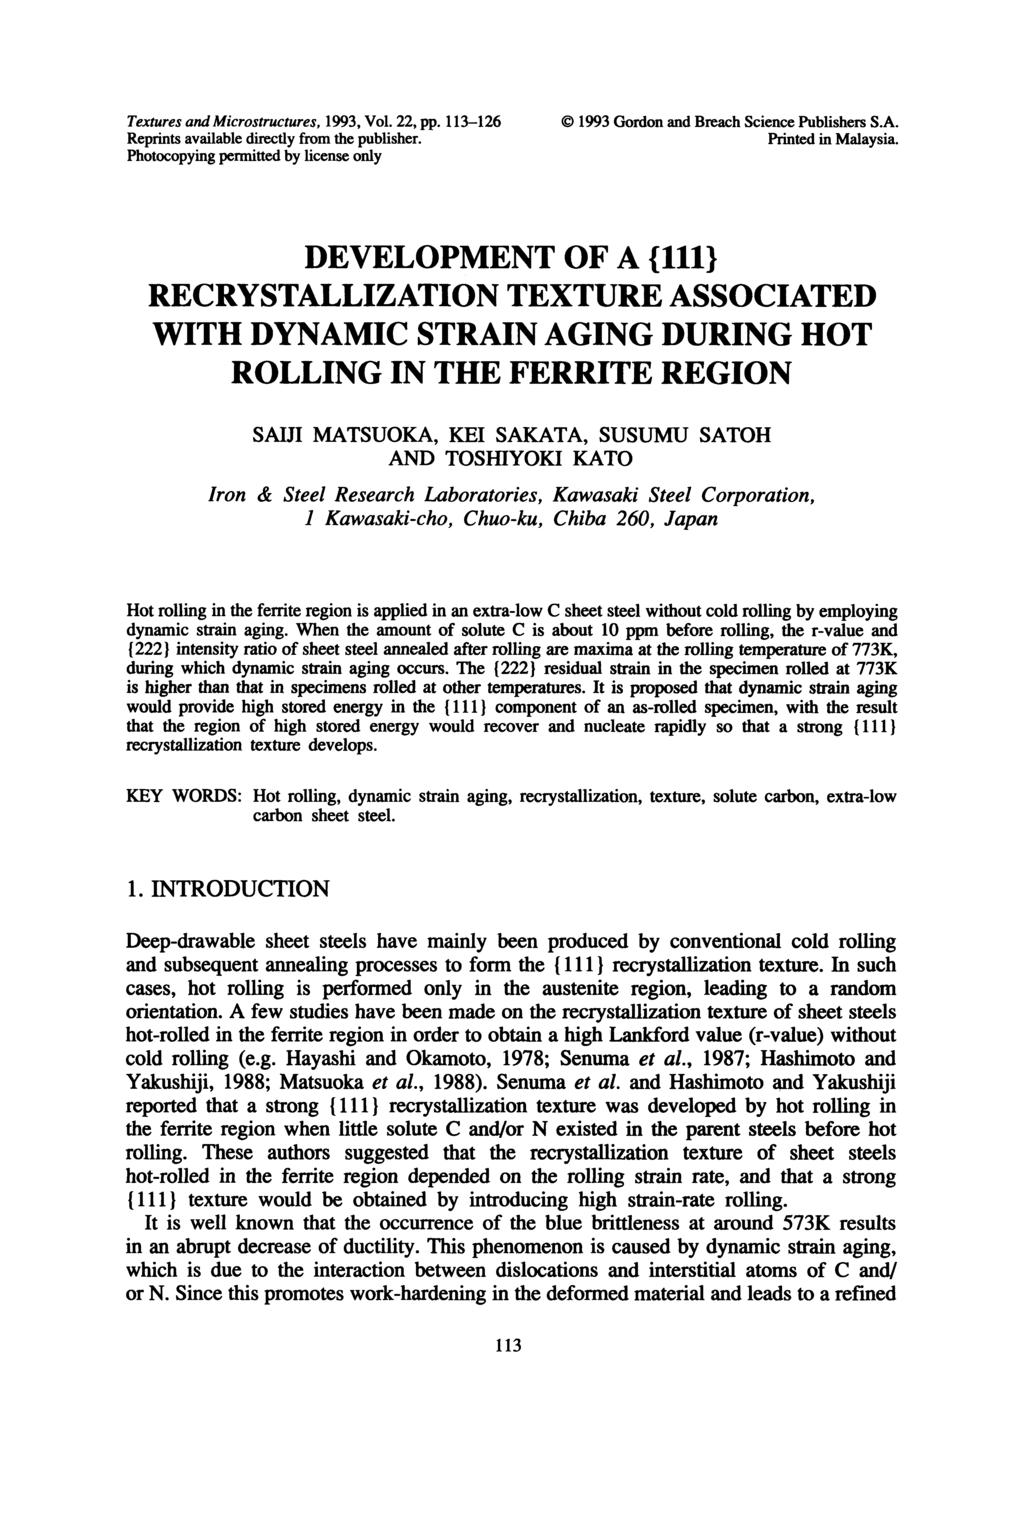 Textures and Microstructures, 1993, Vol. 22, pp. 113-126 Reprints available directly from the publisher. Photocopying Irmitted by license only (C) 1993 Gordon and Breach Science Publishers S.A.